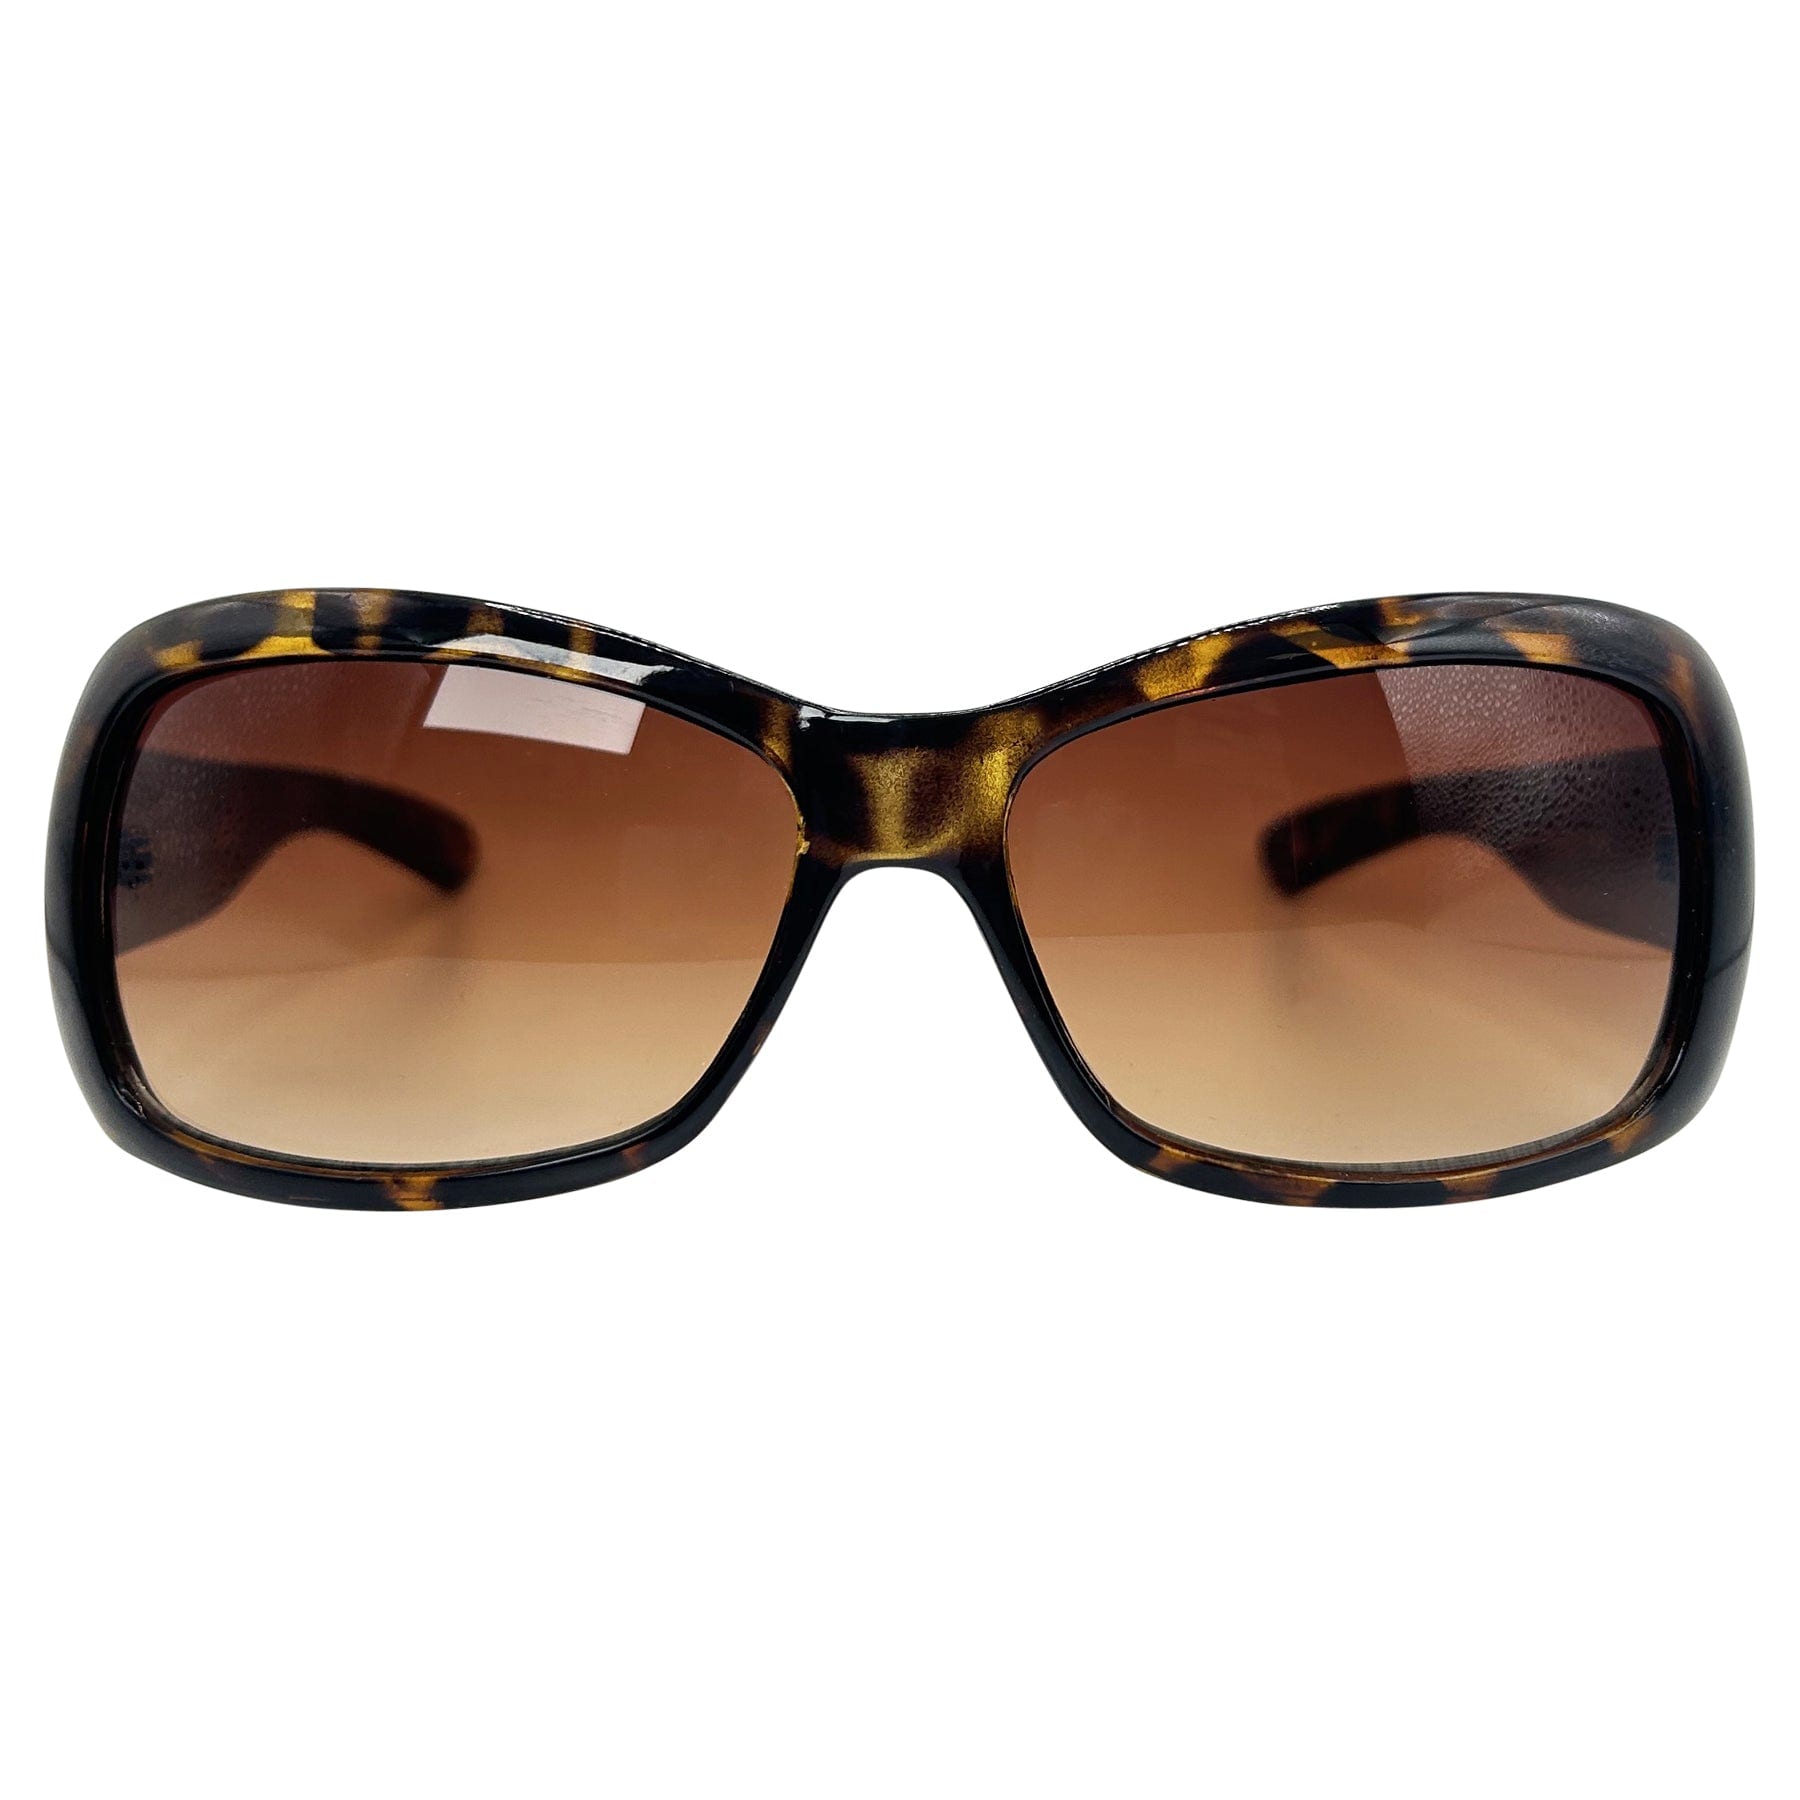 vintage sunglasses with an amber lens and tortoise frame 